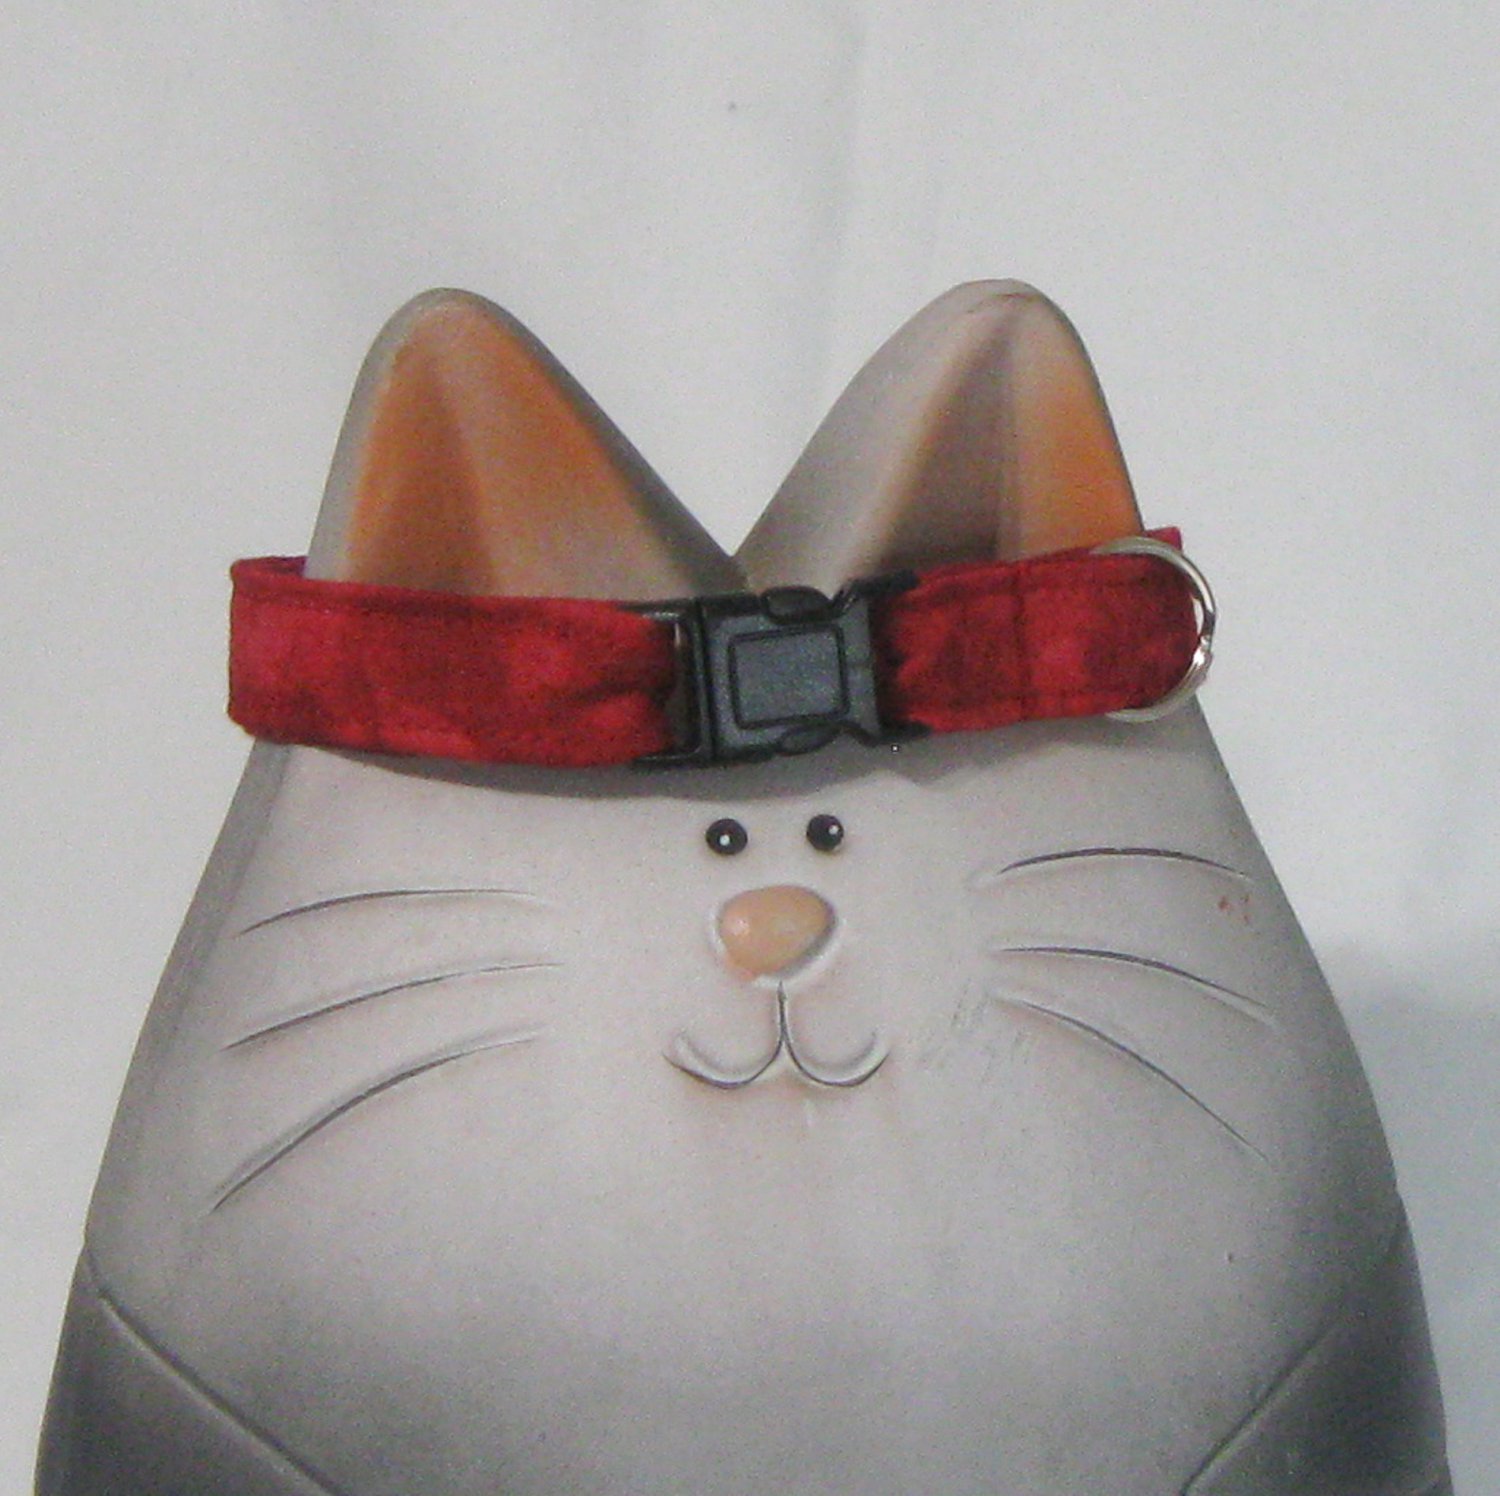 Breakaway Cat Collar, Cat Safety Collar in Blended Reds Cotton Fabric, Soft and Comfortable